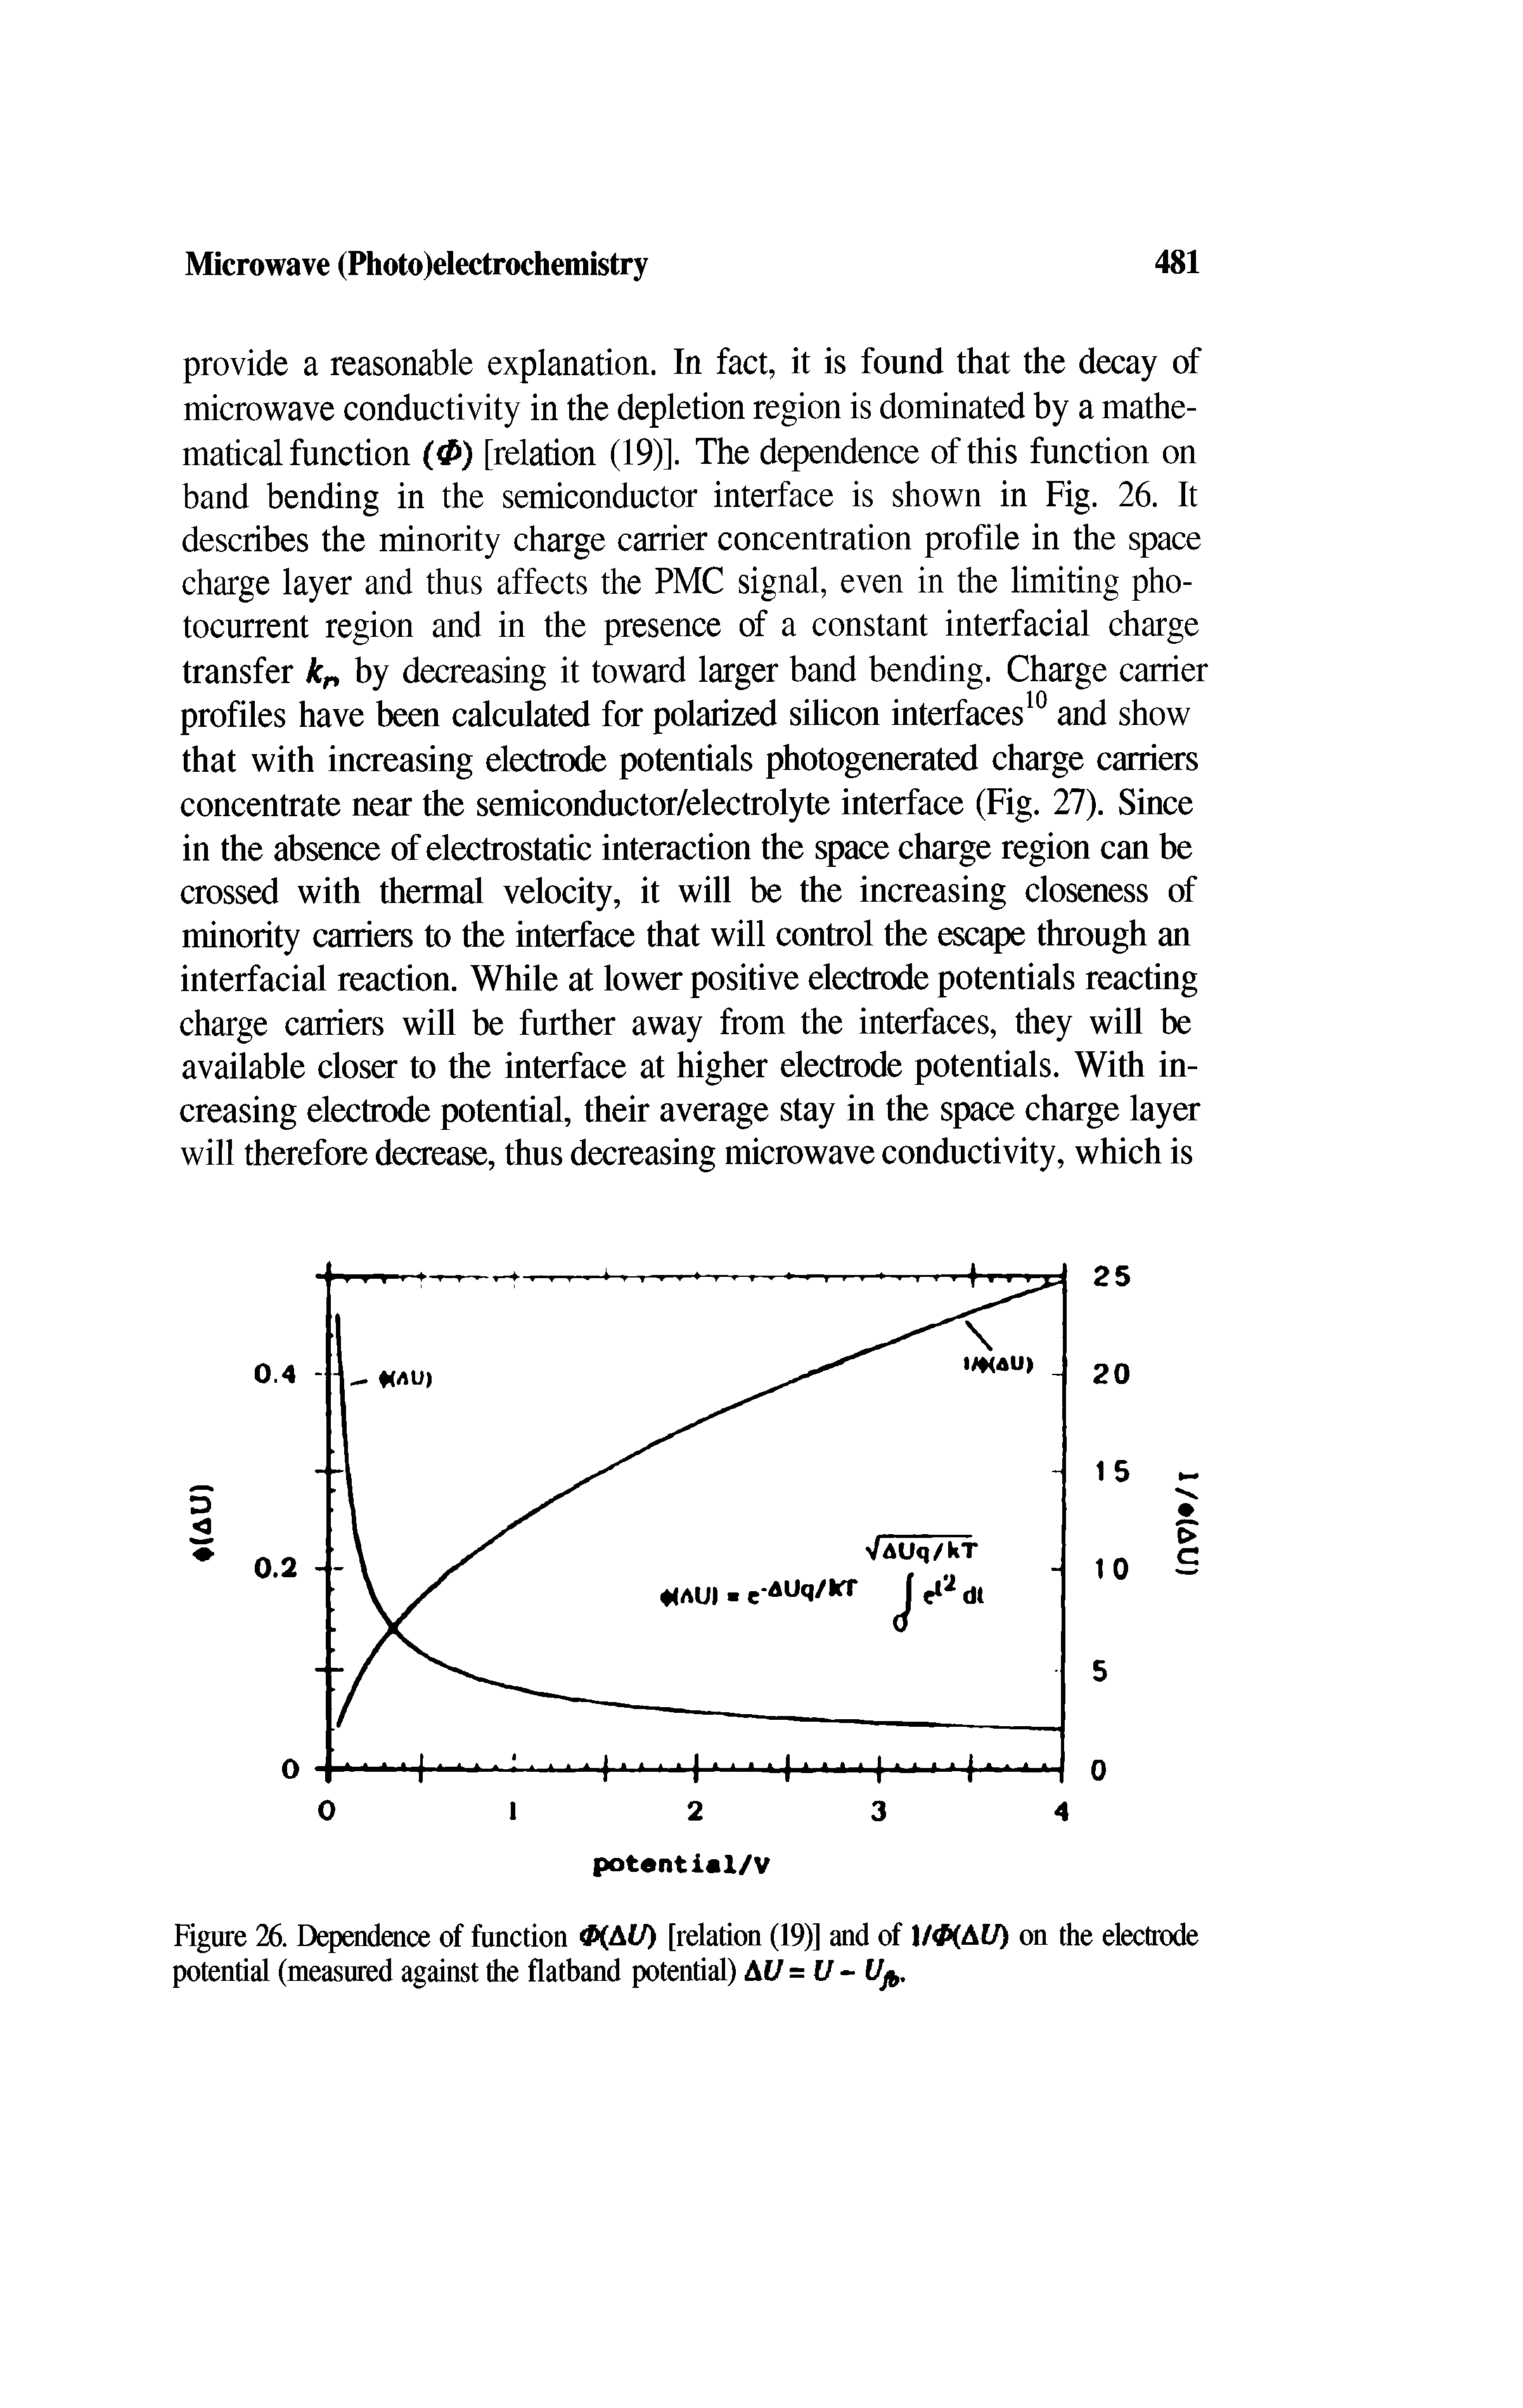 Figure 26. Dependence of function 4K.AU) [relation (19)] and of /<P(AU) on the electrode potential (measured against the flatband potential) A U=U- U. ...